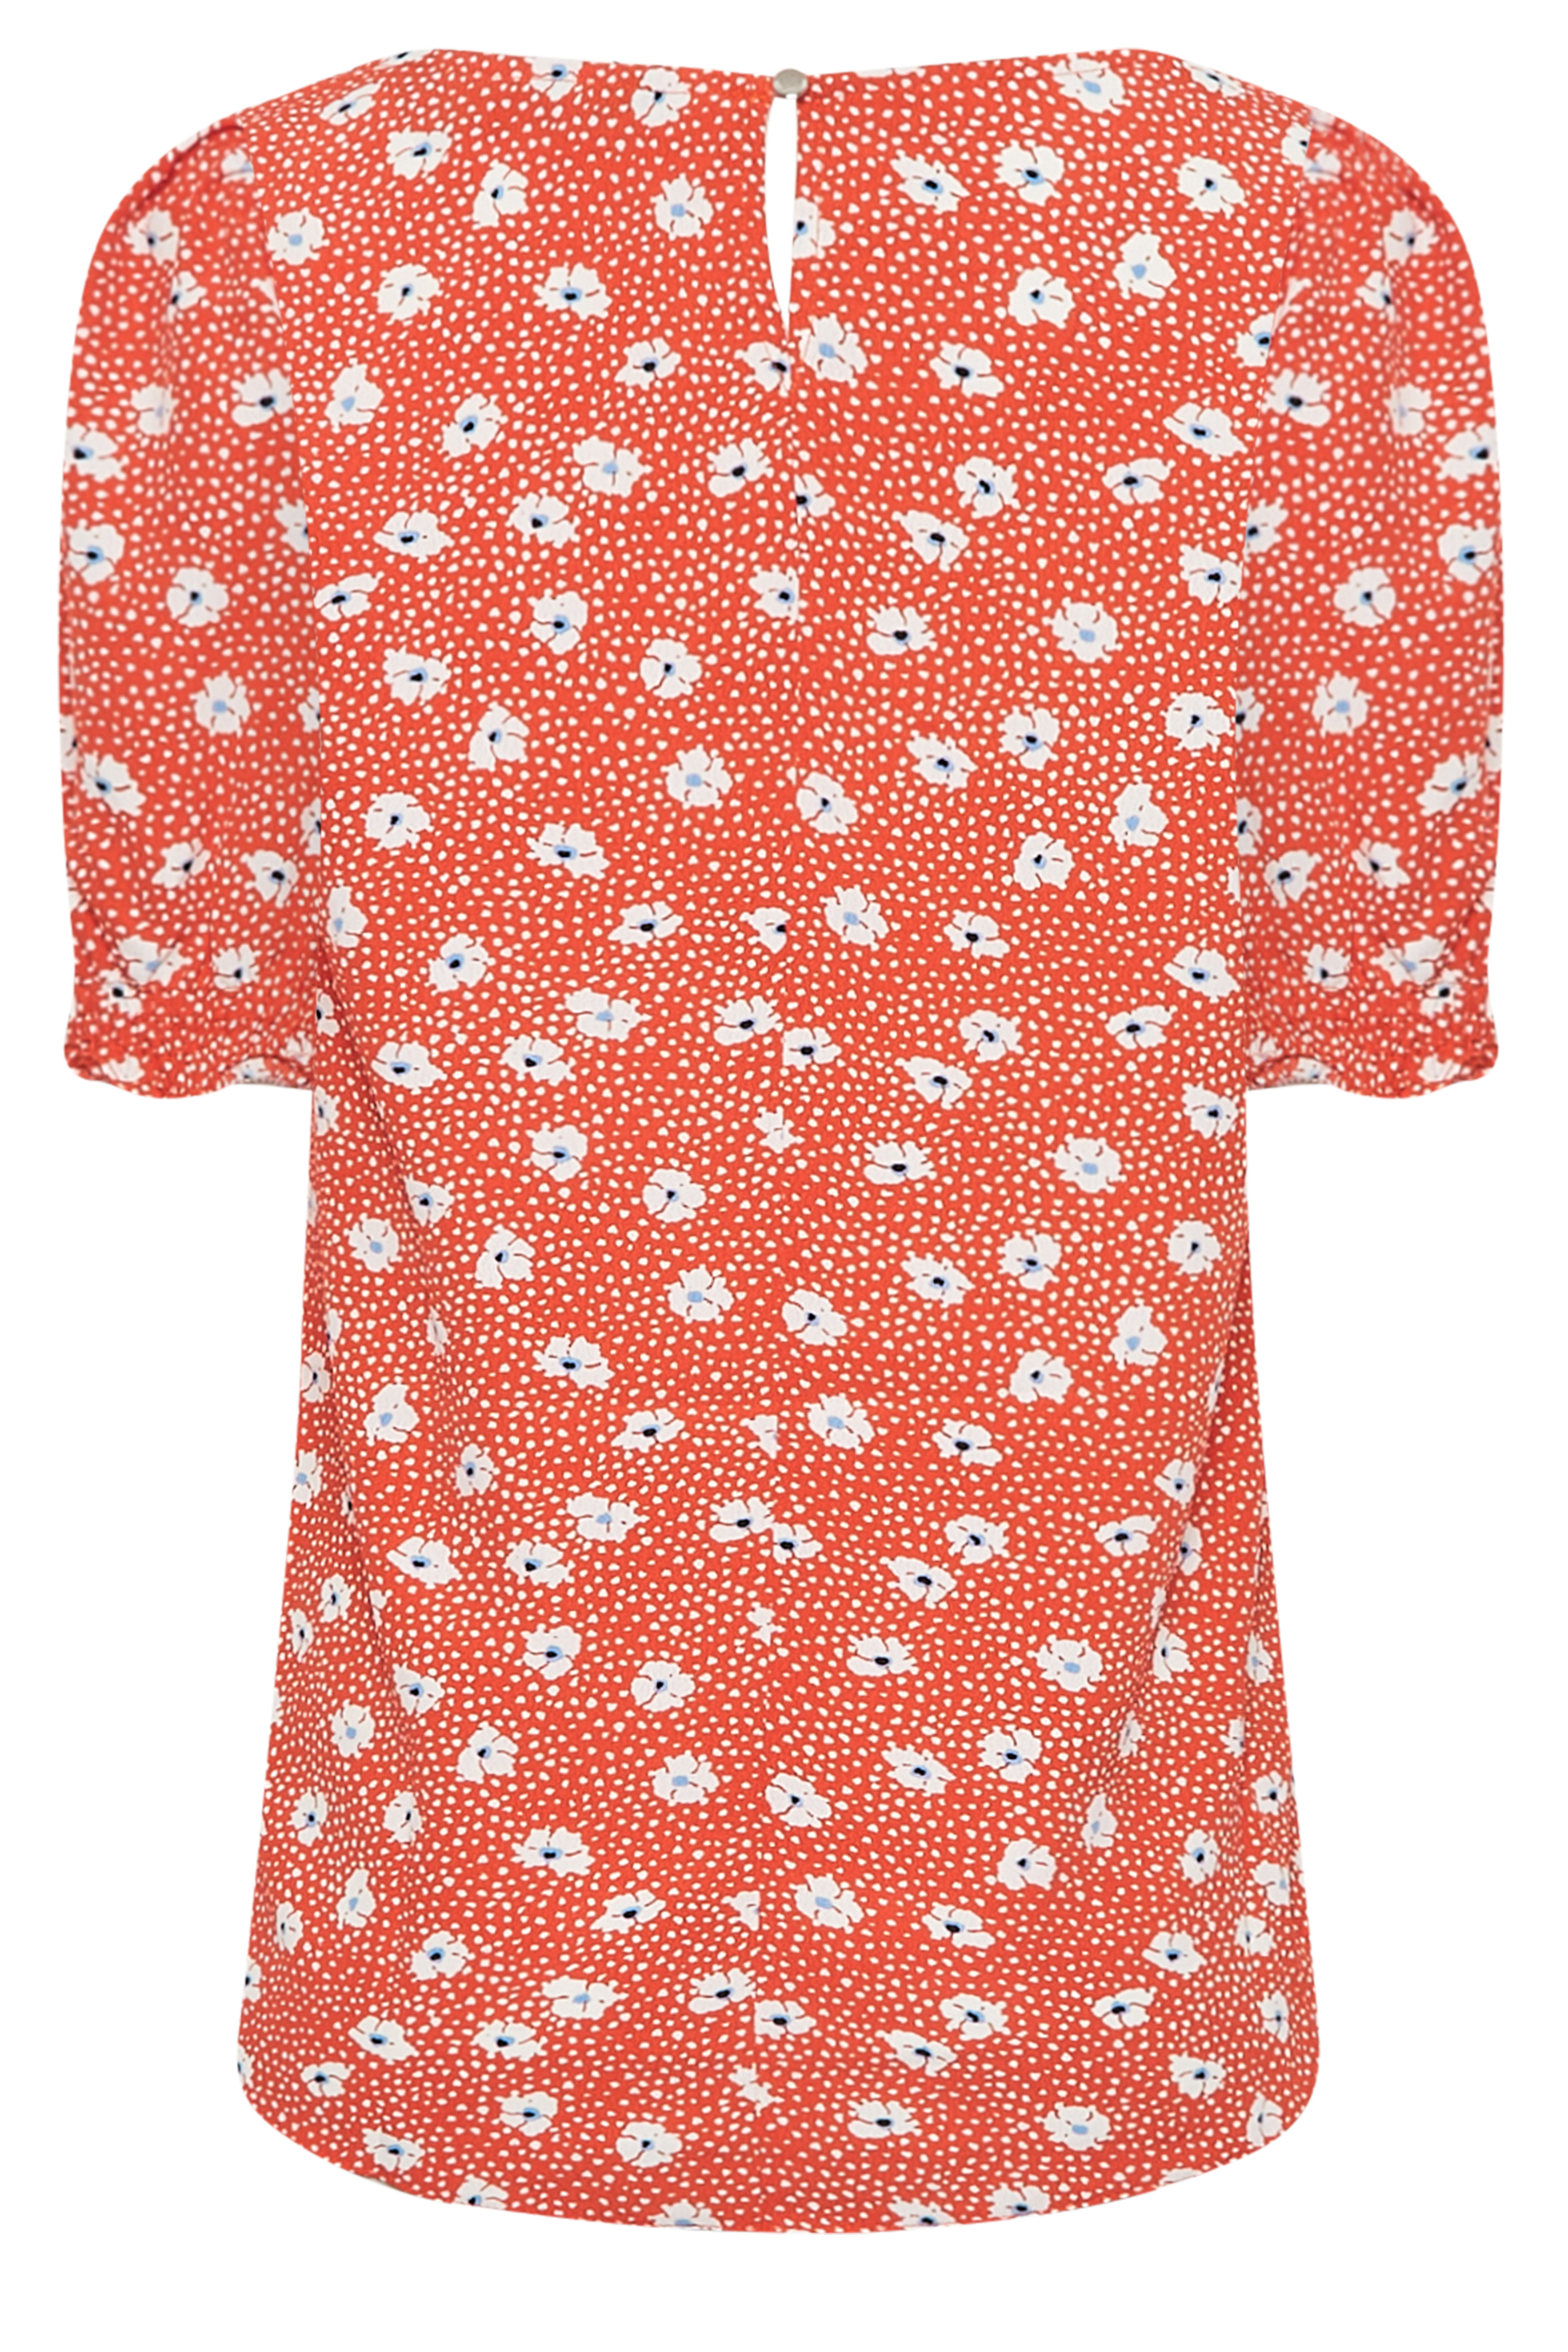 M&Co Red Daisy Print Blouse | M&Co 3